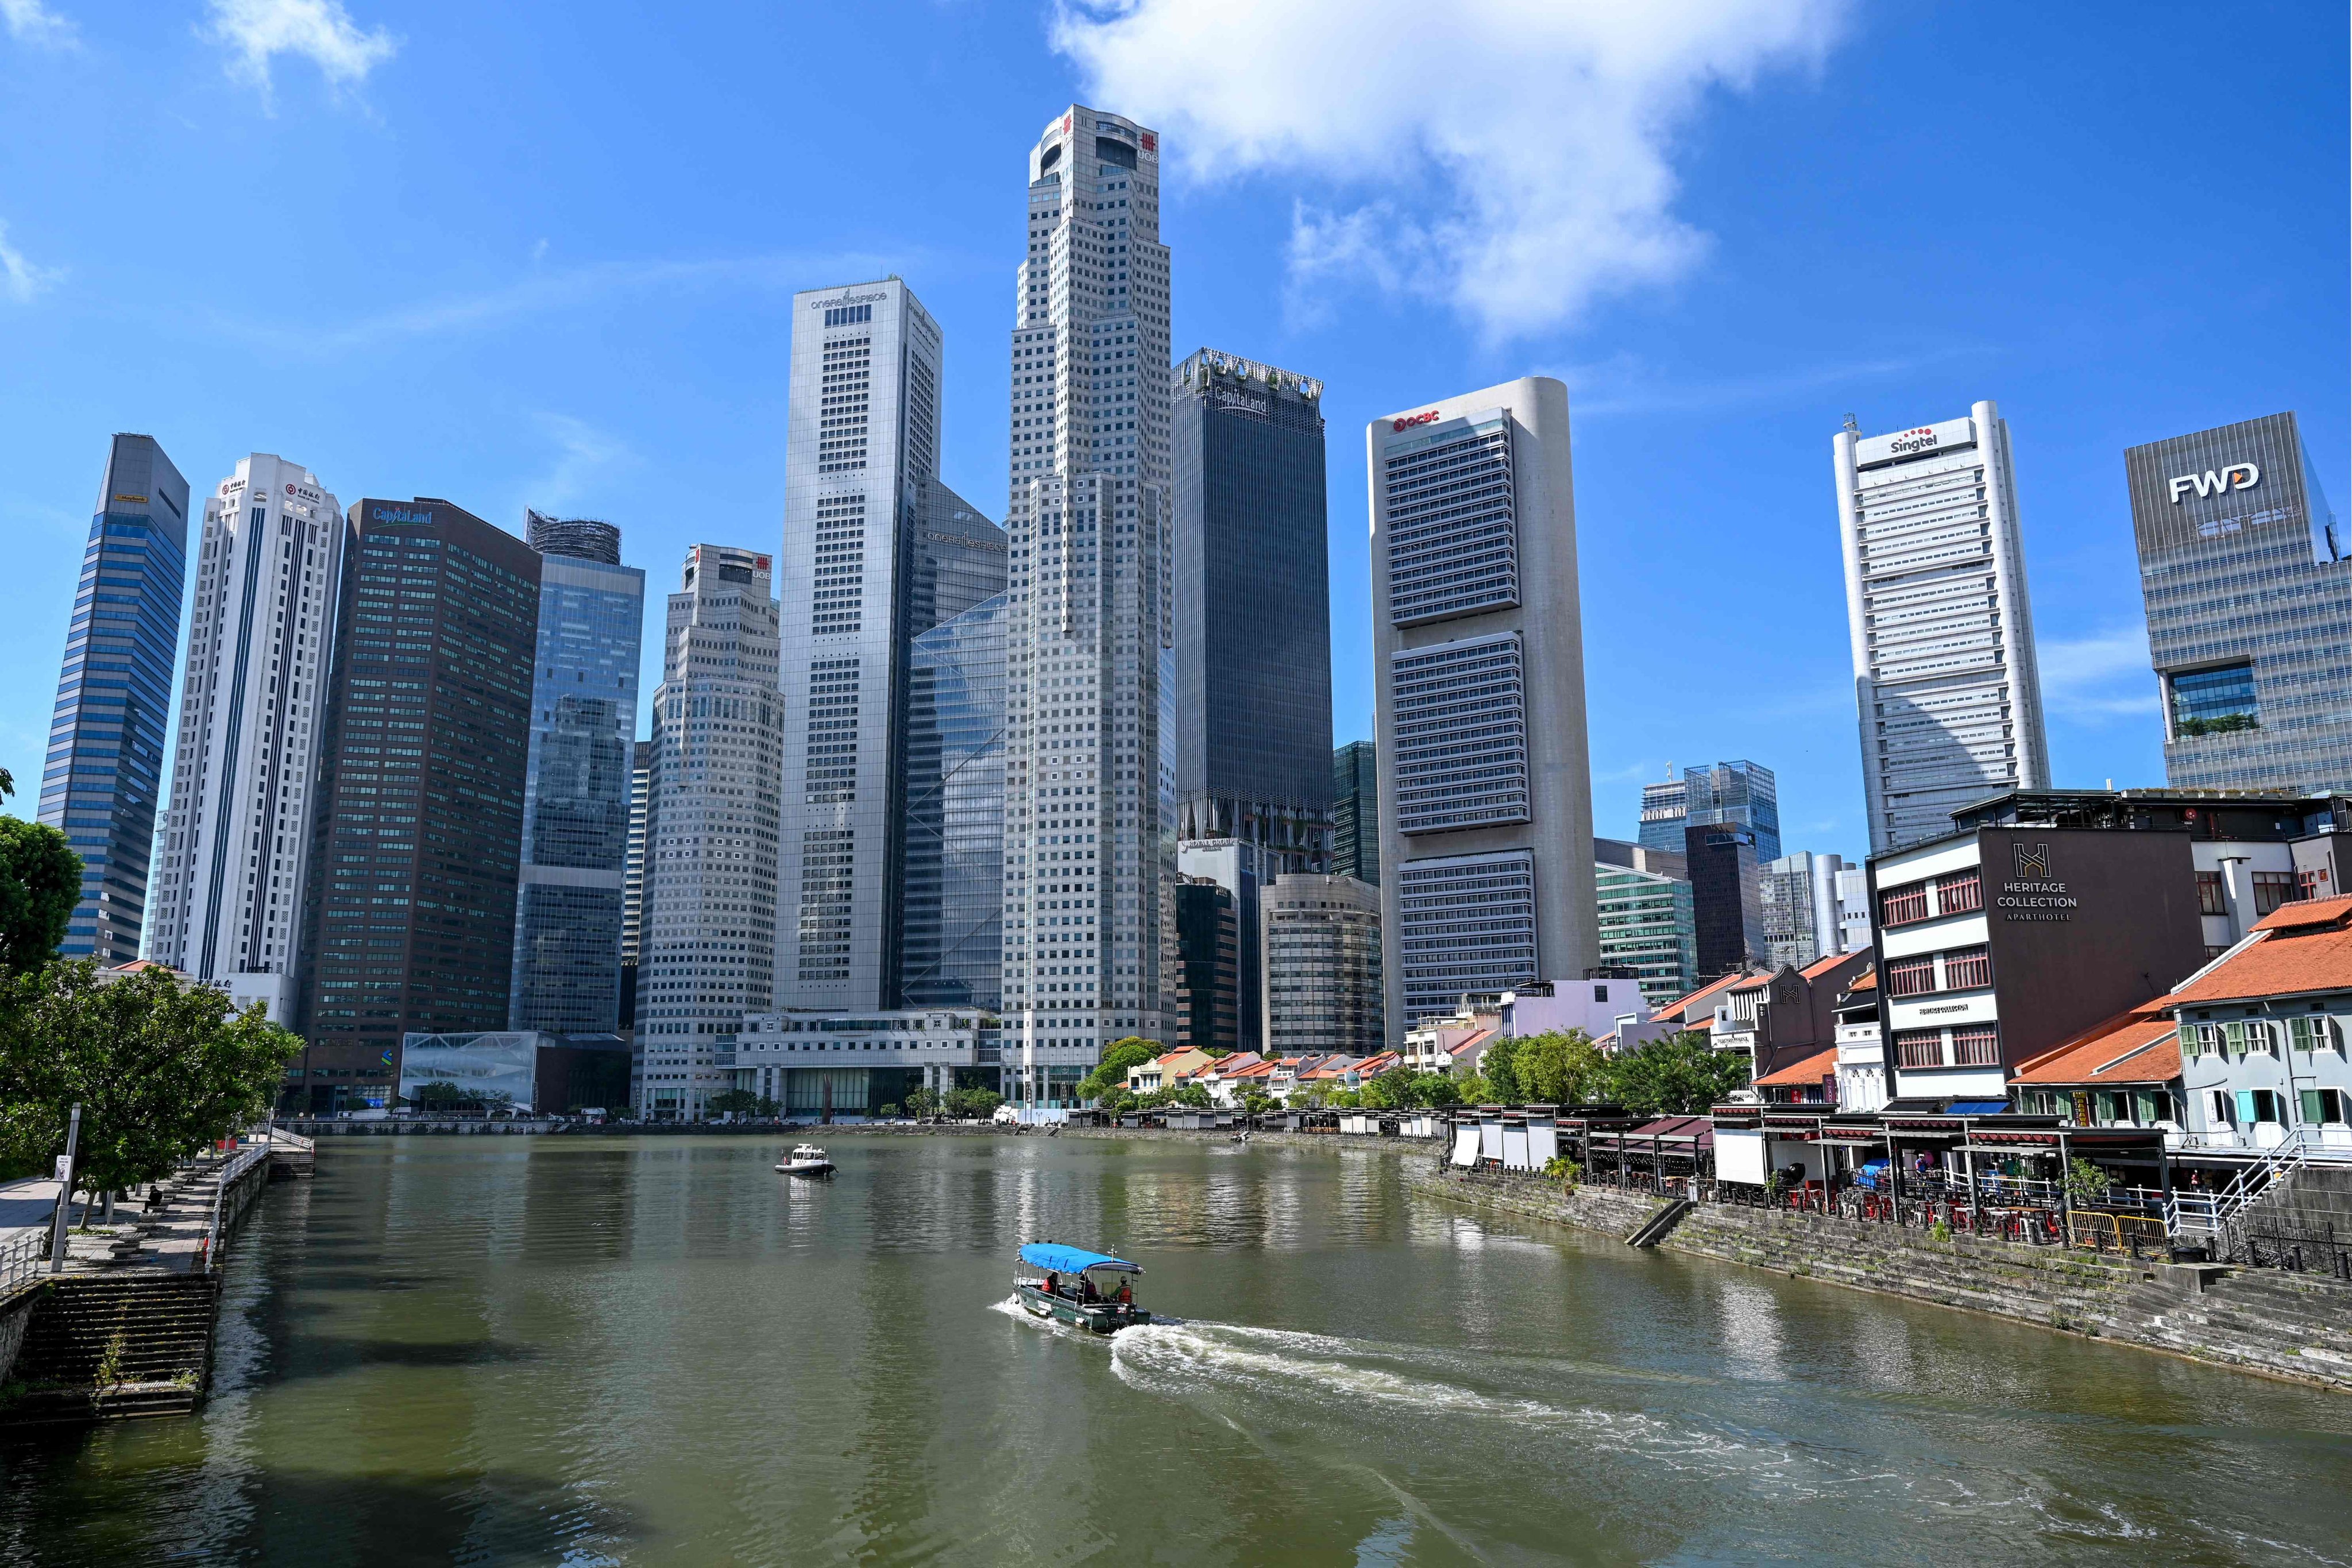 A boat cruises on the water in the central financial business district area in Singapore. The investigation prompted authorities to set up an interministerial panel to review anti-money-laundering measures and inspect financial institutions suspected of involvement. Photo: AFP